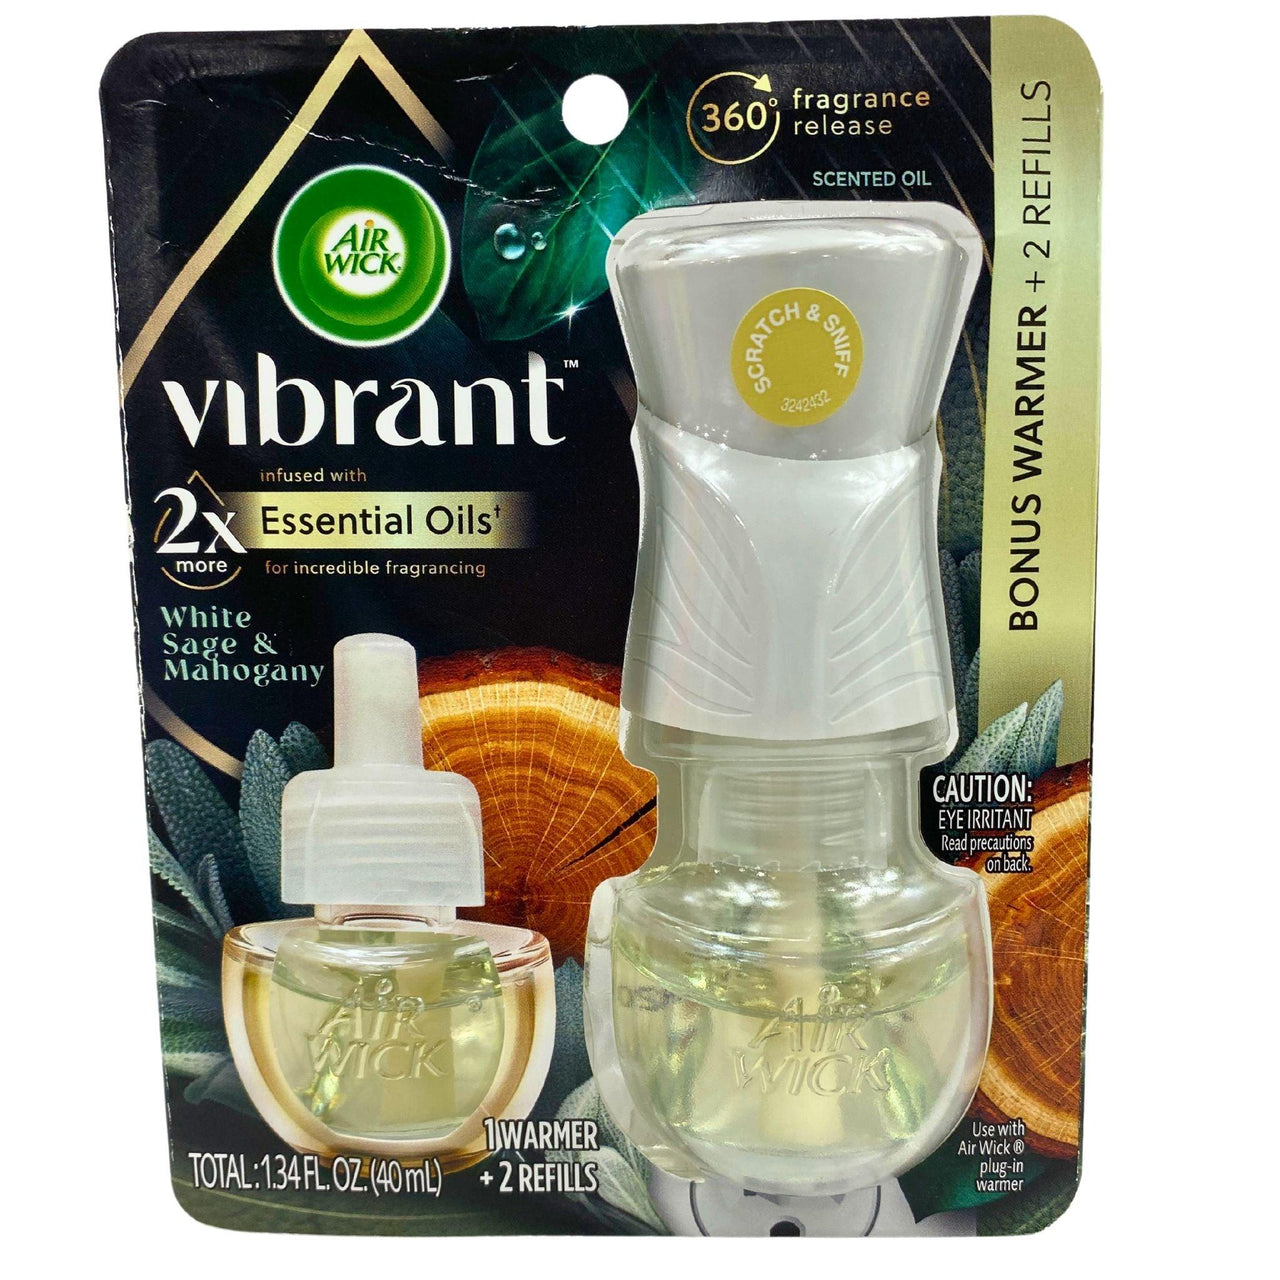 Air Wick Vibrant Plug in Scented Oil White Sage & Mahogany 1 Warmer, 2 Refills (58 Pcs Lot) - Discount Wholesalers Inc